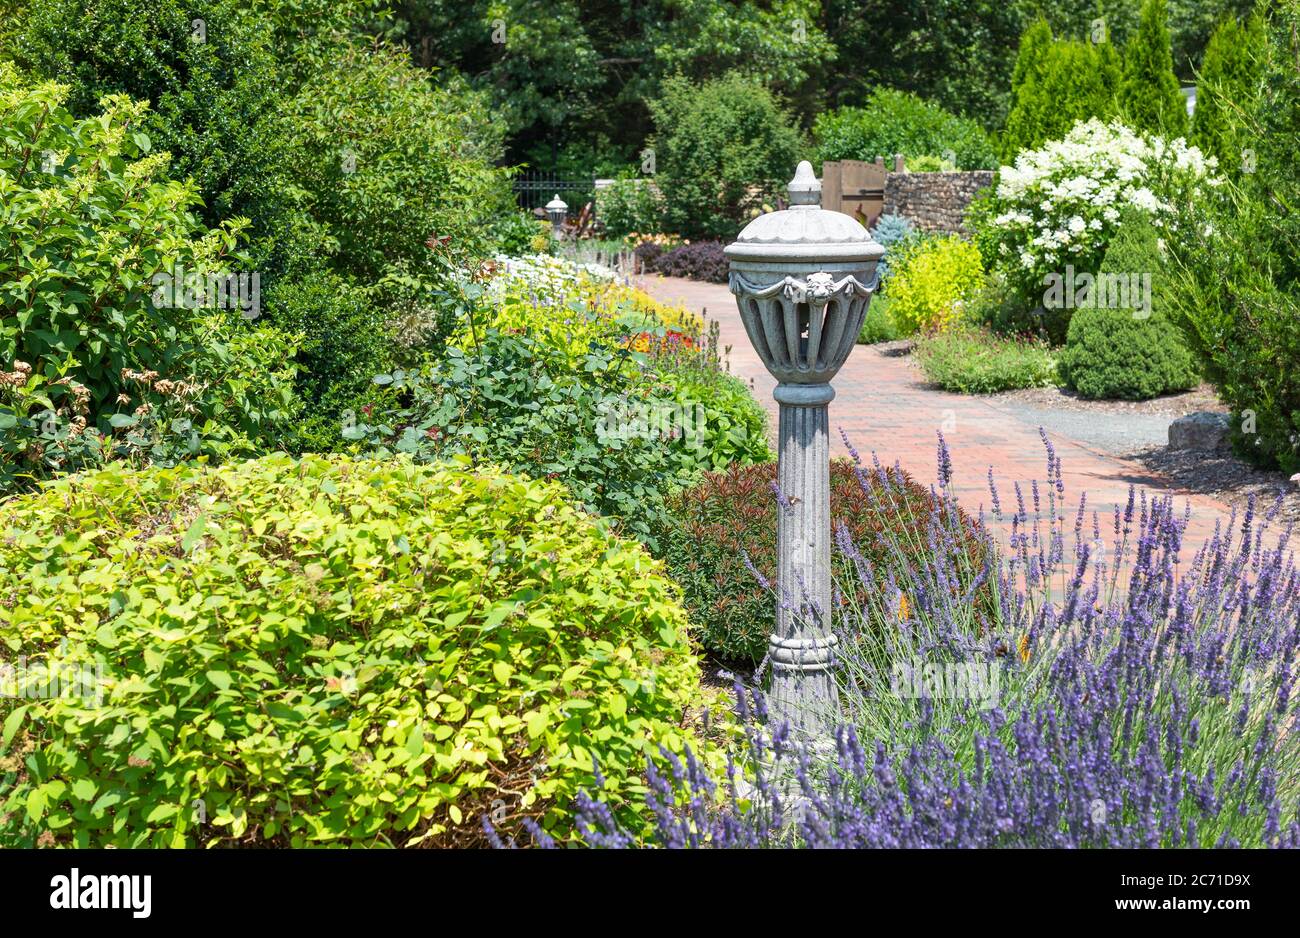 Landscape with formal garden with colorful shrubs and flowering plants with urn on bright sunny day Stock Photo